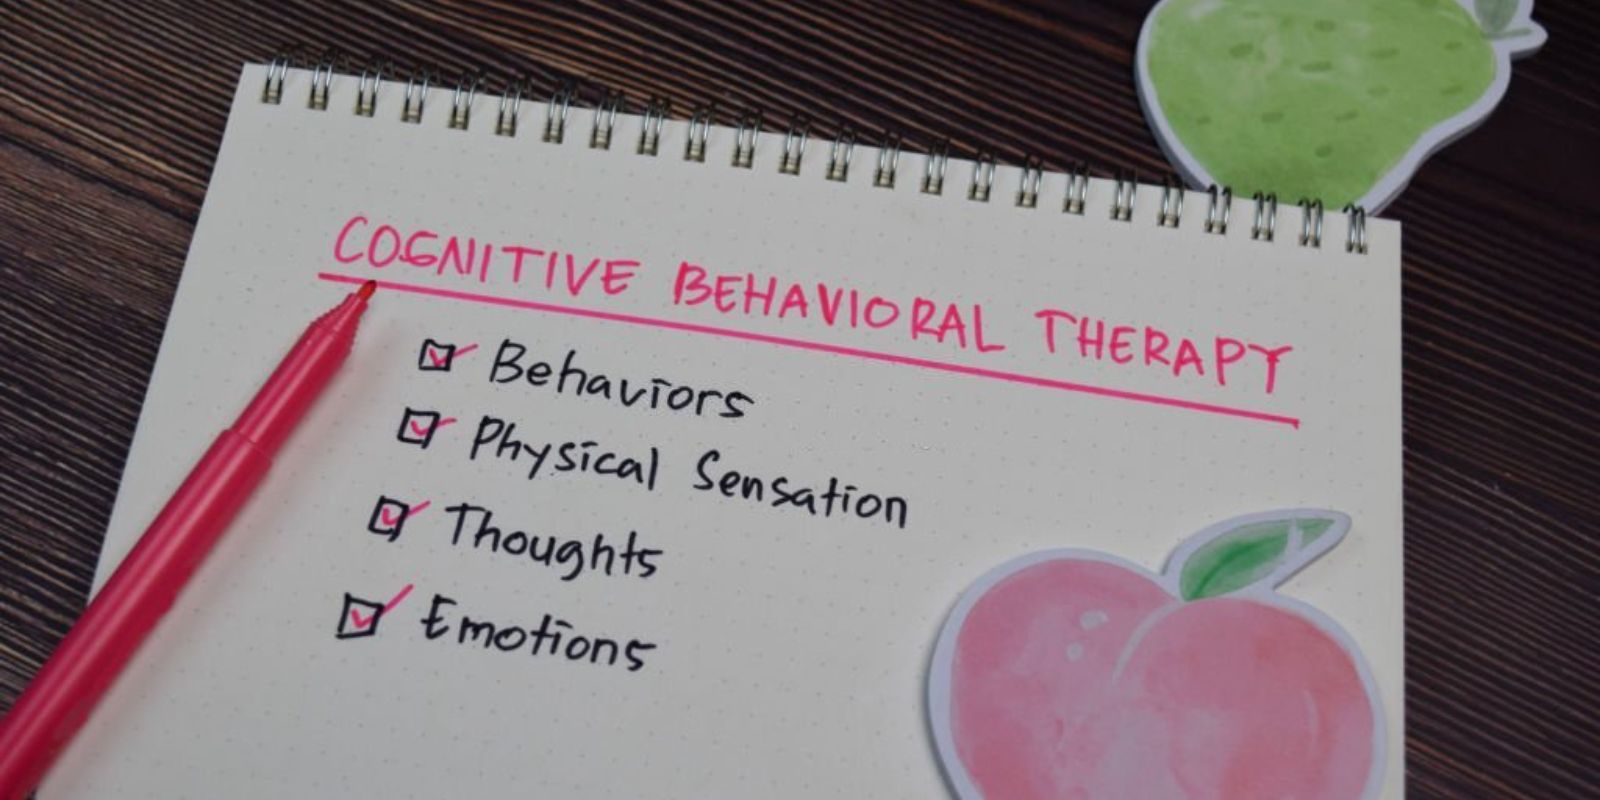 Cognitive Behavioral Therapy for OCD: Coping with Obsessive Thoughts